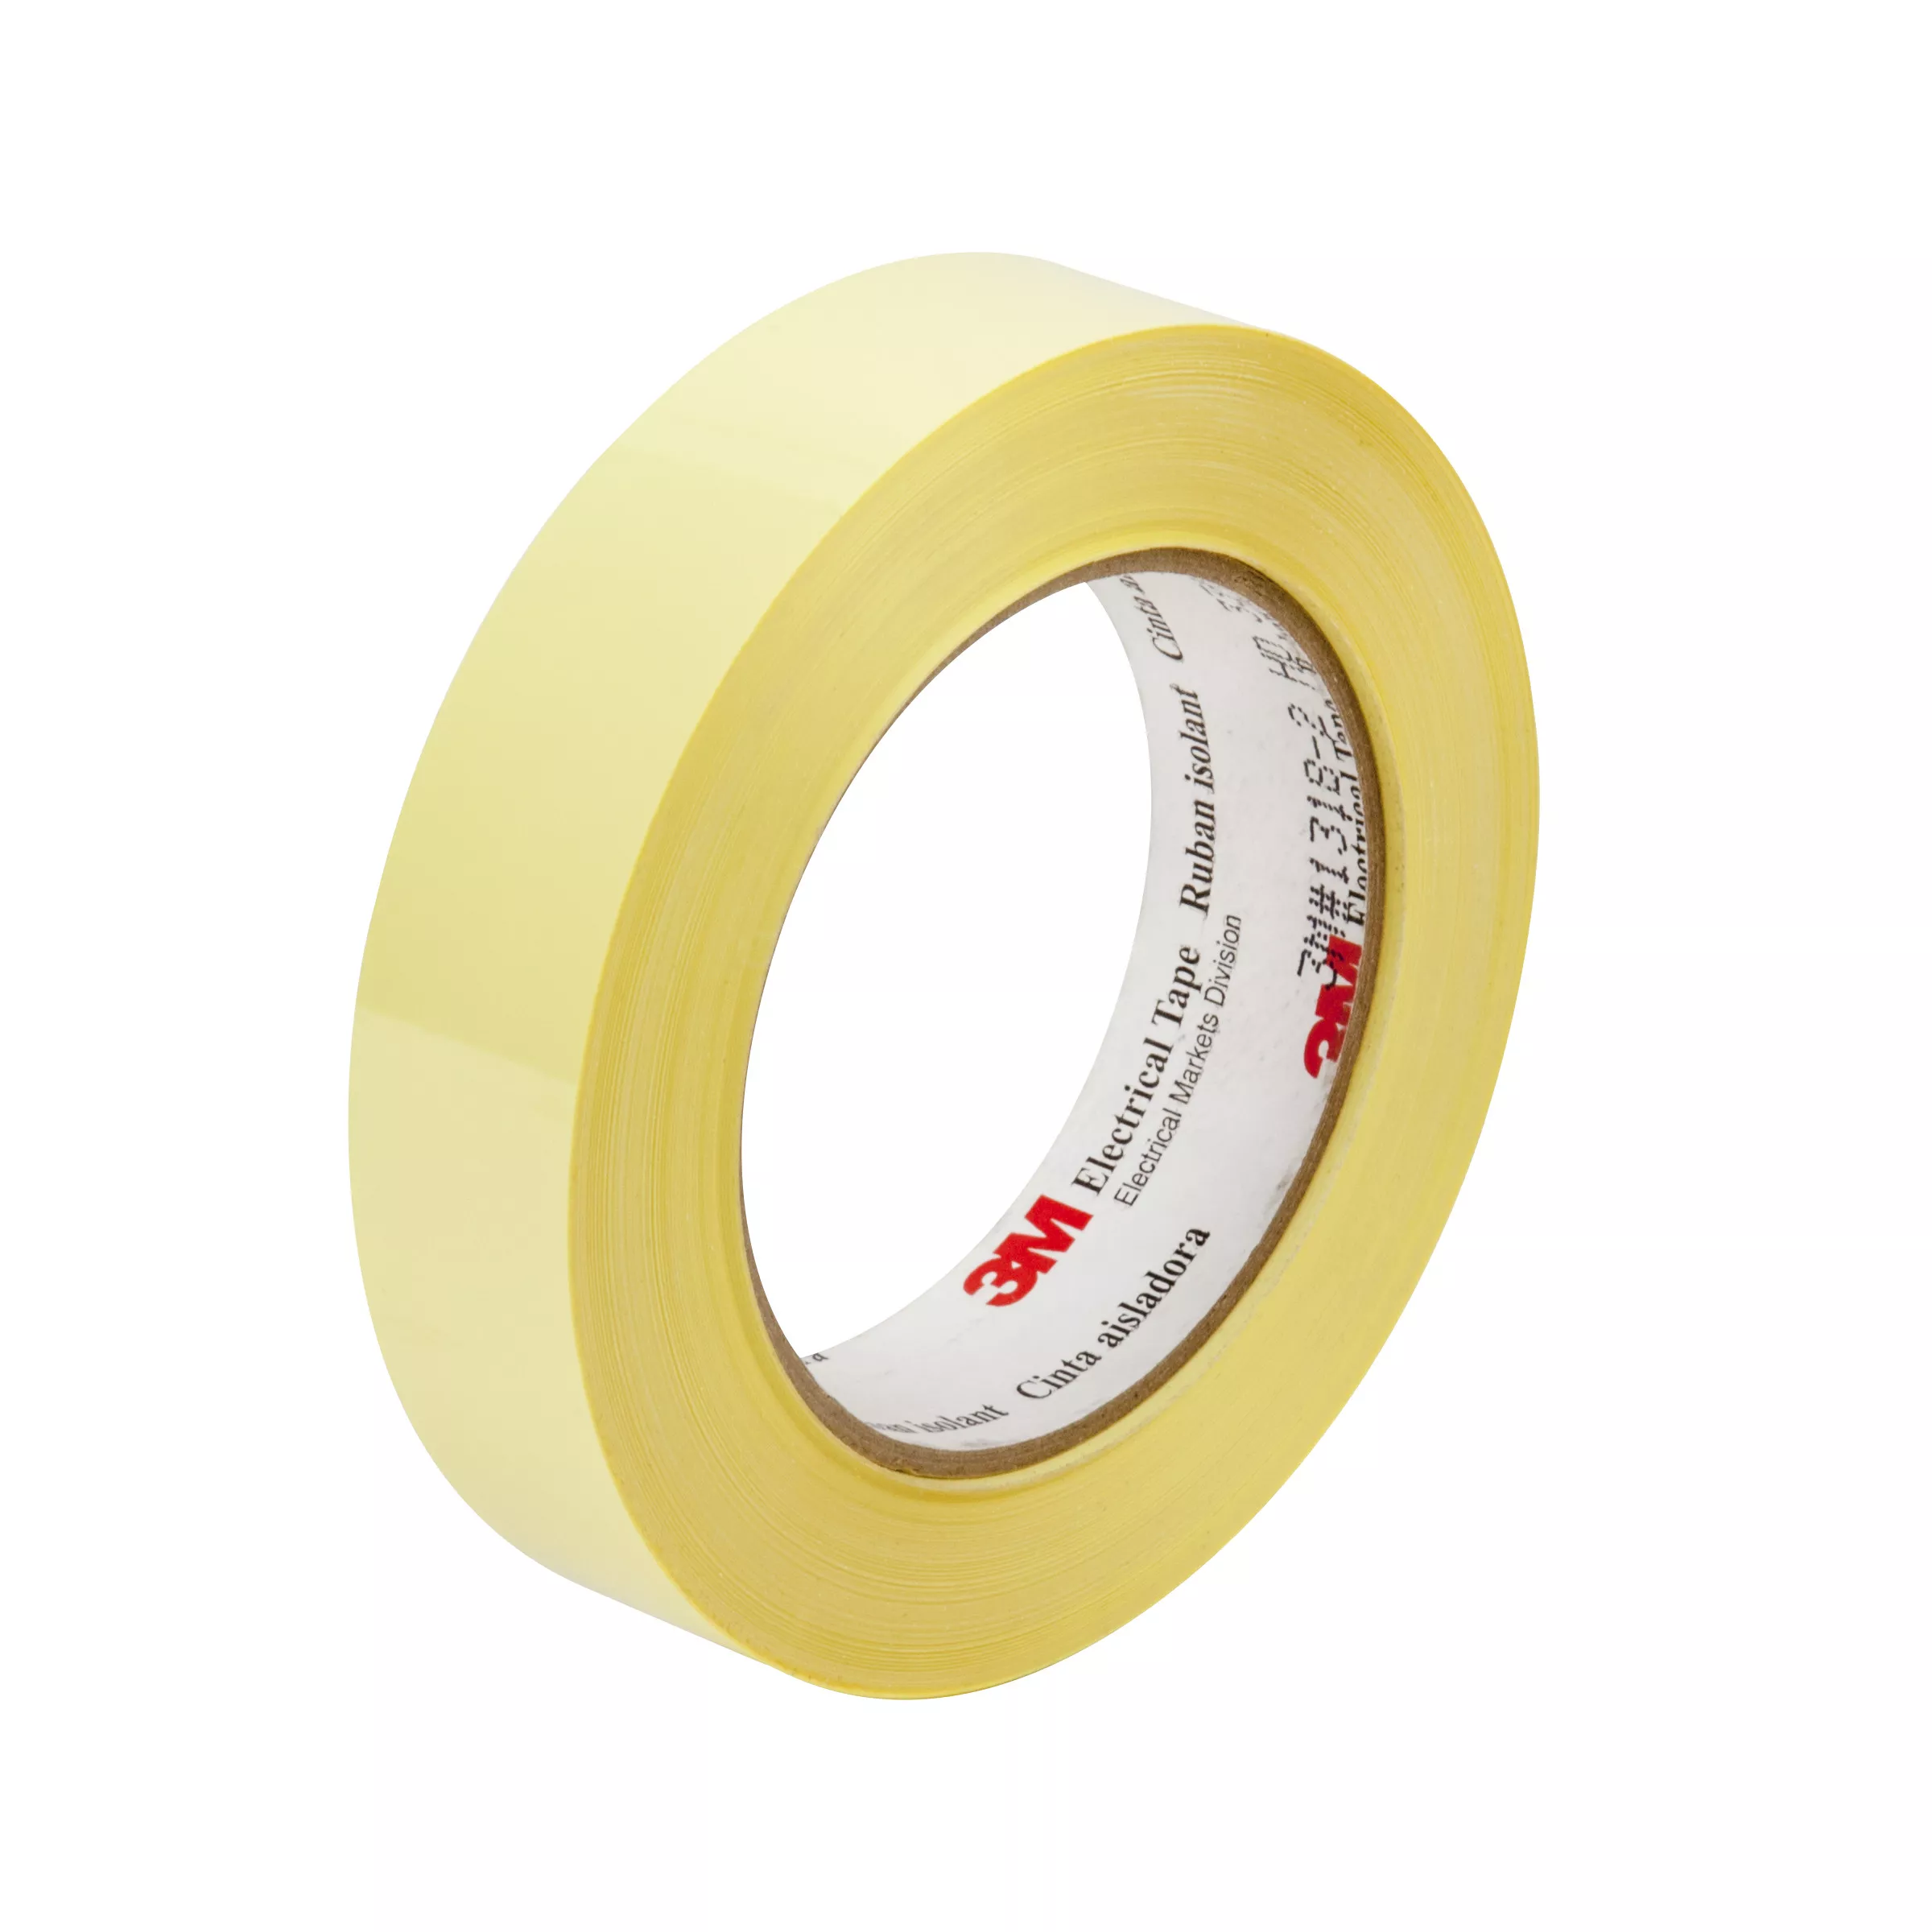 3M™ Polyester Film Electrical Tape 1350F-1, yellow, 24